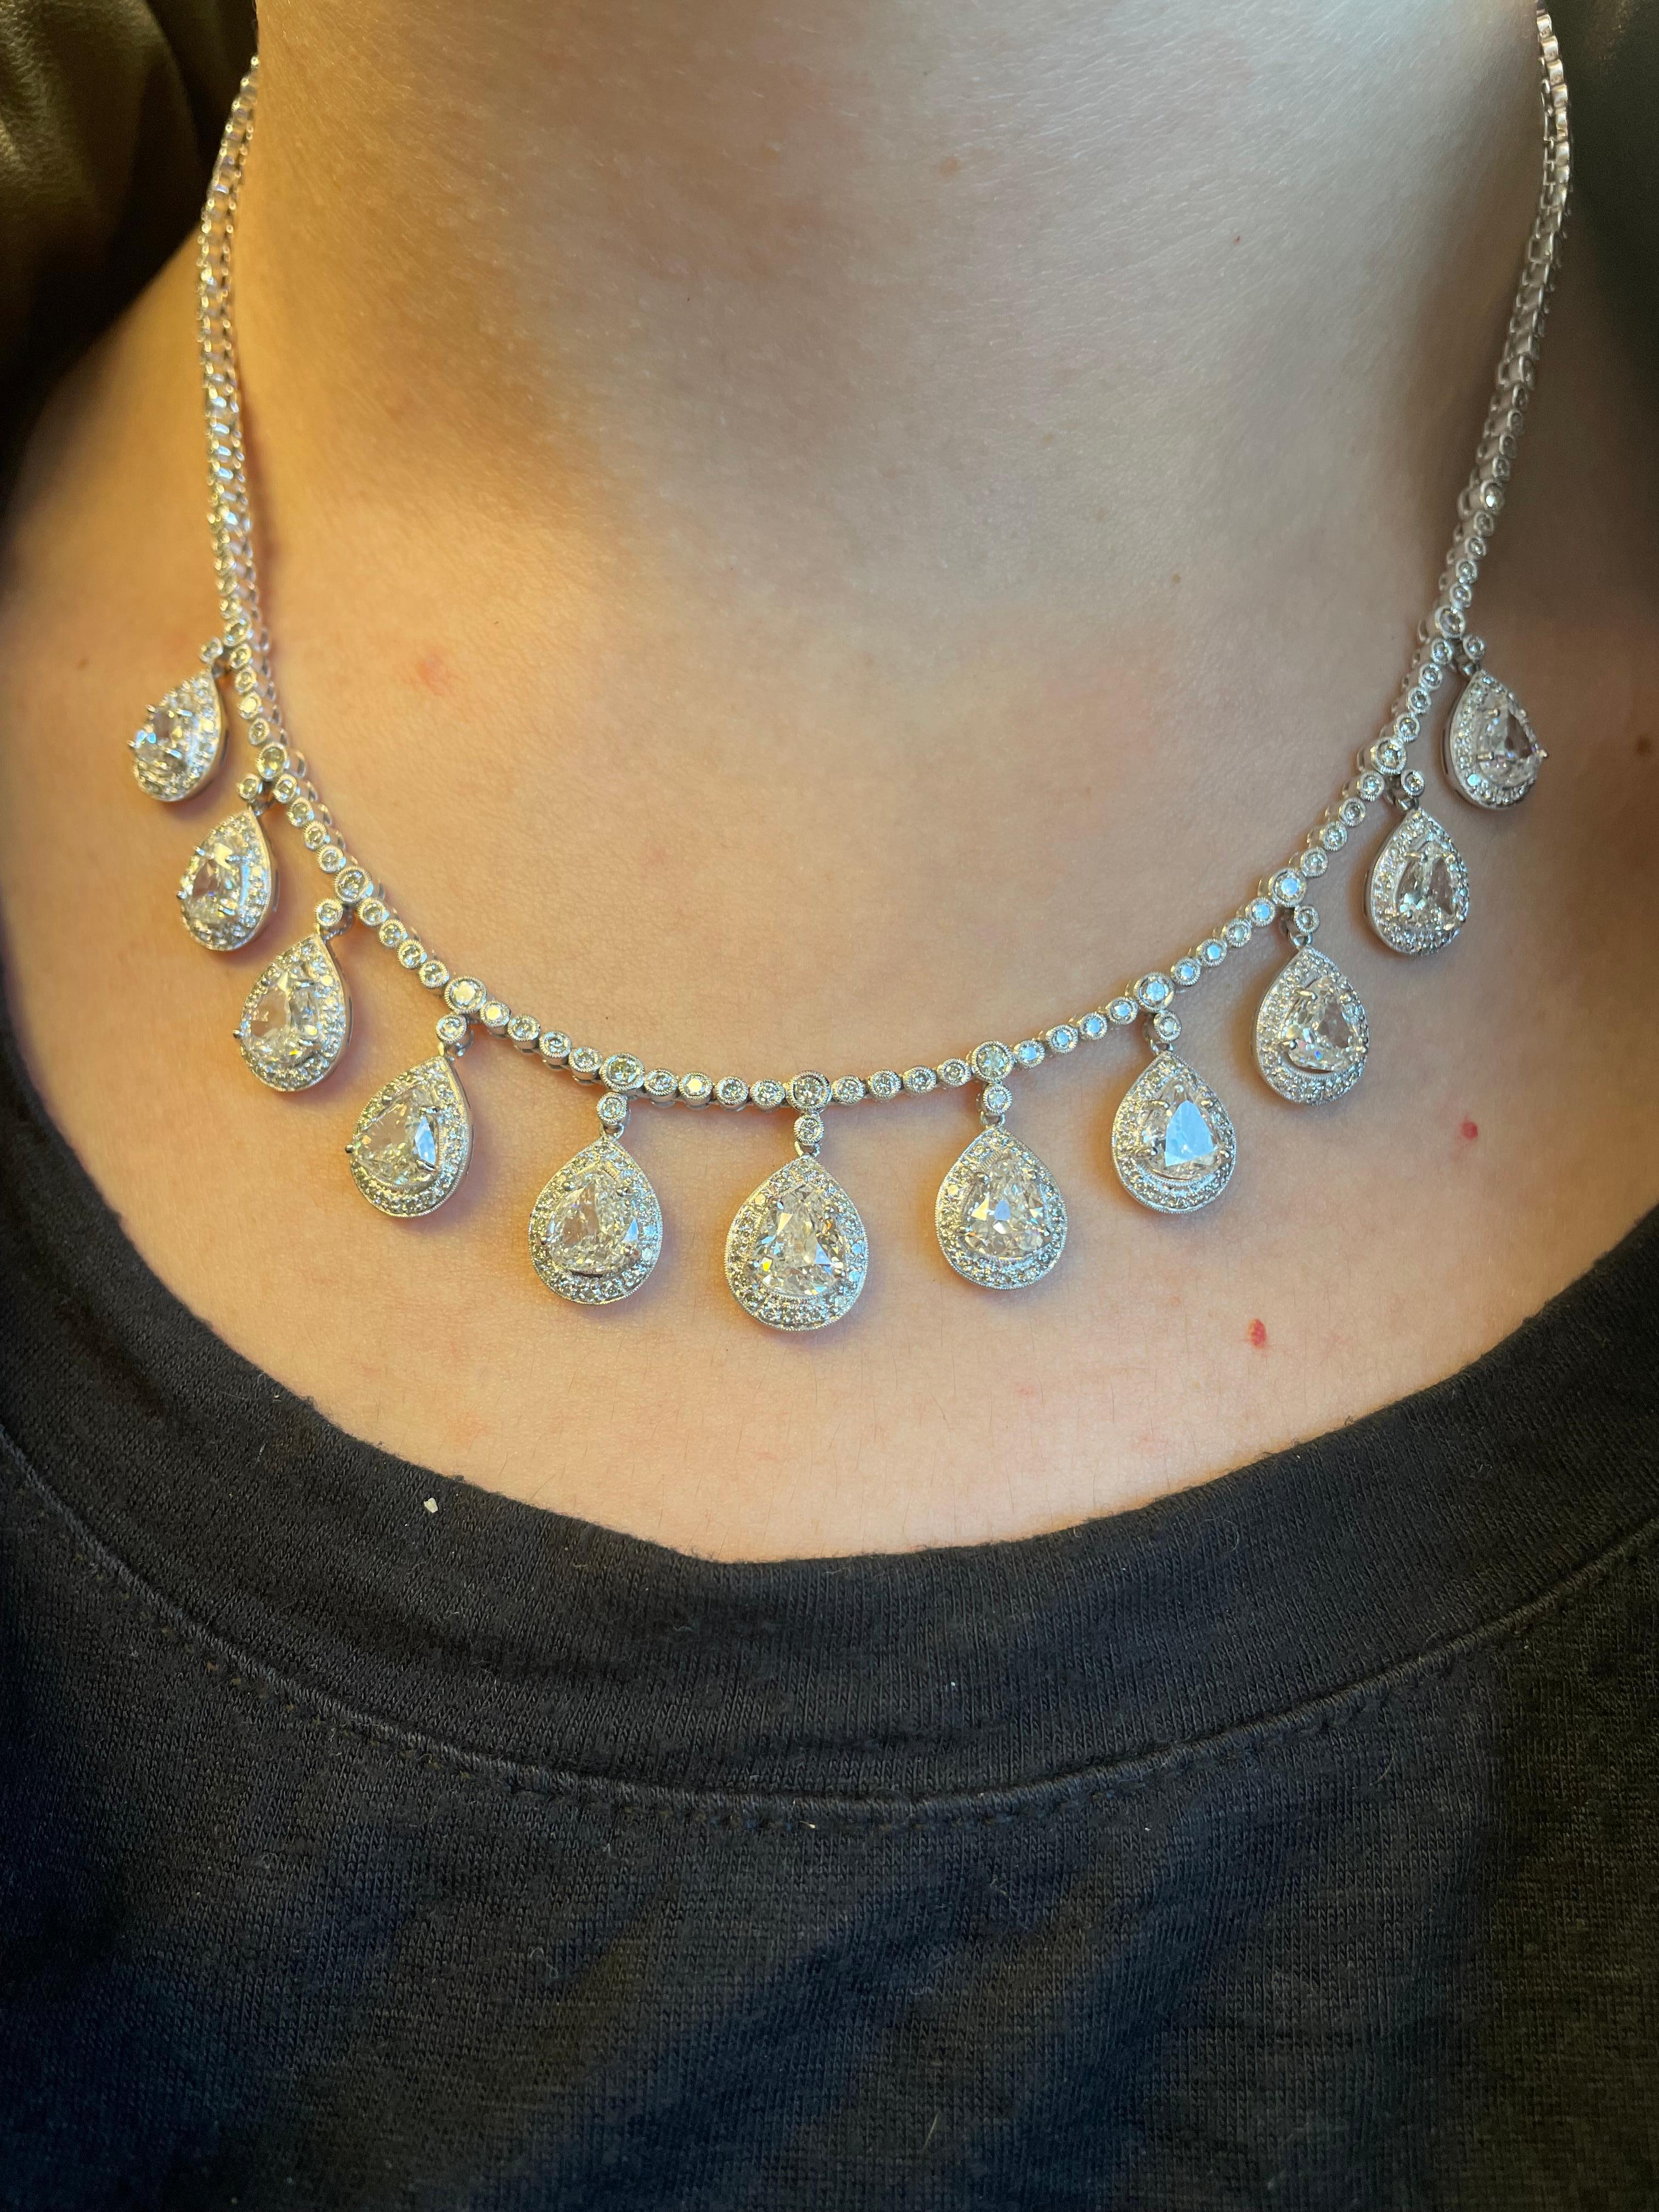 Exquisite dangling round brilliant diamond high jewelry necklace.
353 diamonds total, 12.76 carats total. 9 round brilliant diamonds 4.56ct, approximately G/H color and SI clarity. 344 round brilliant diamonds 8.20ct, approximately G/H color and SI